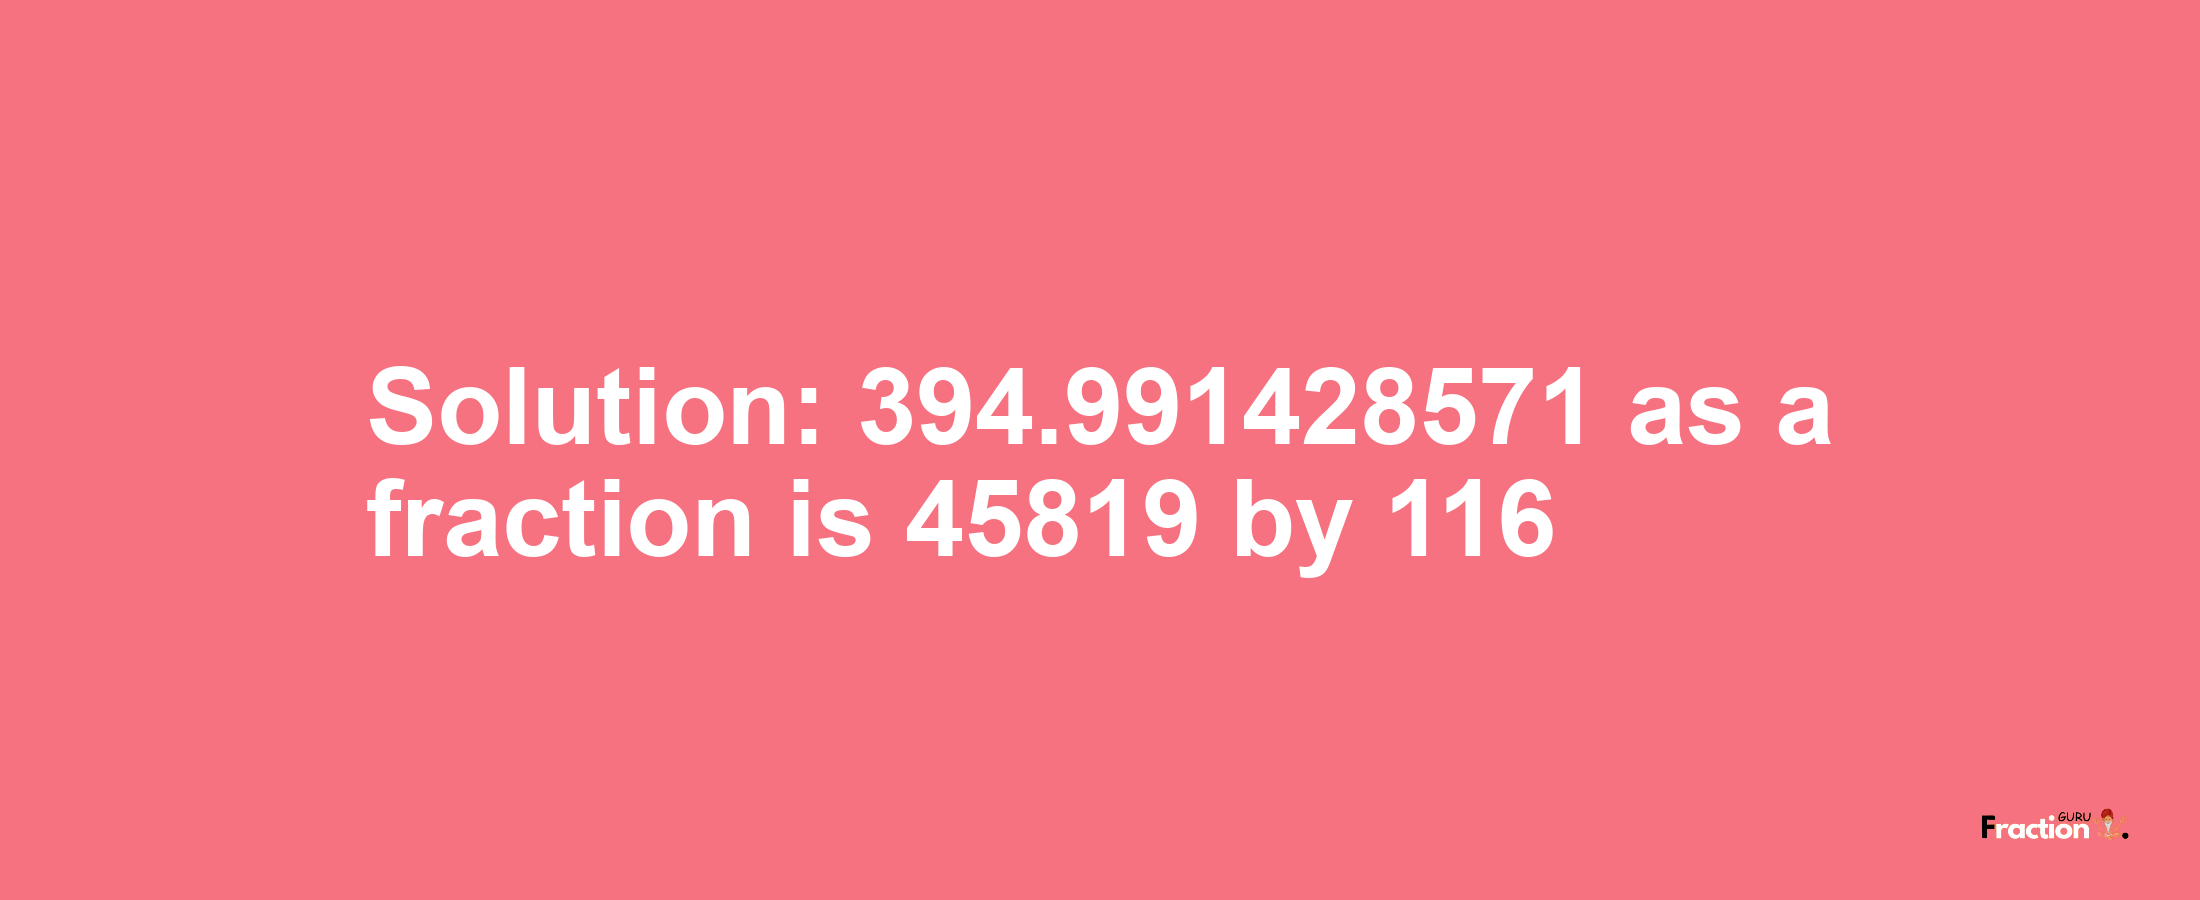 Solution:394.991428571 as a fraction is 45819/116